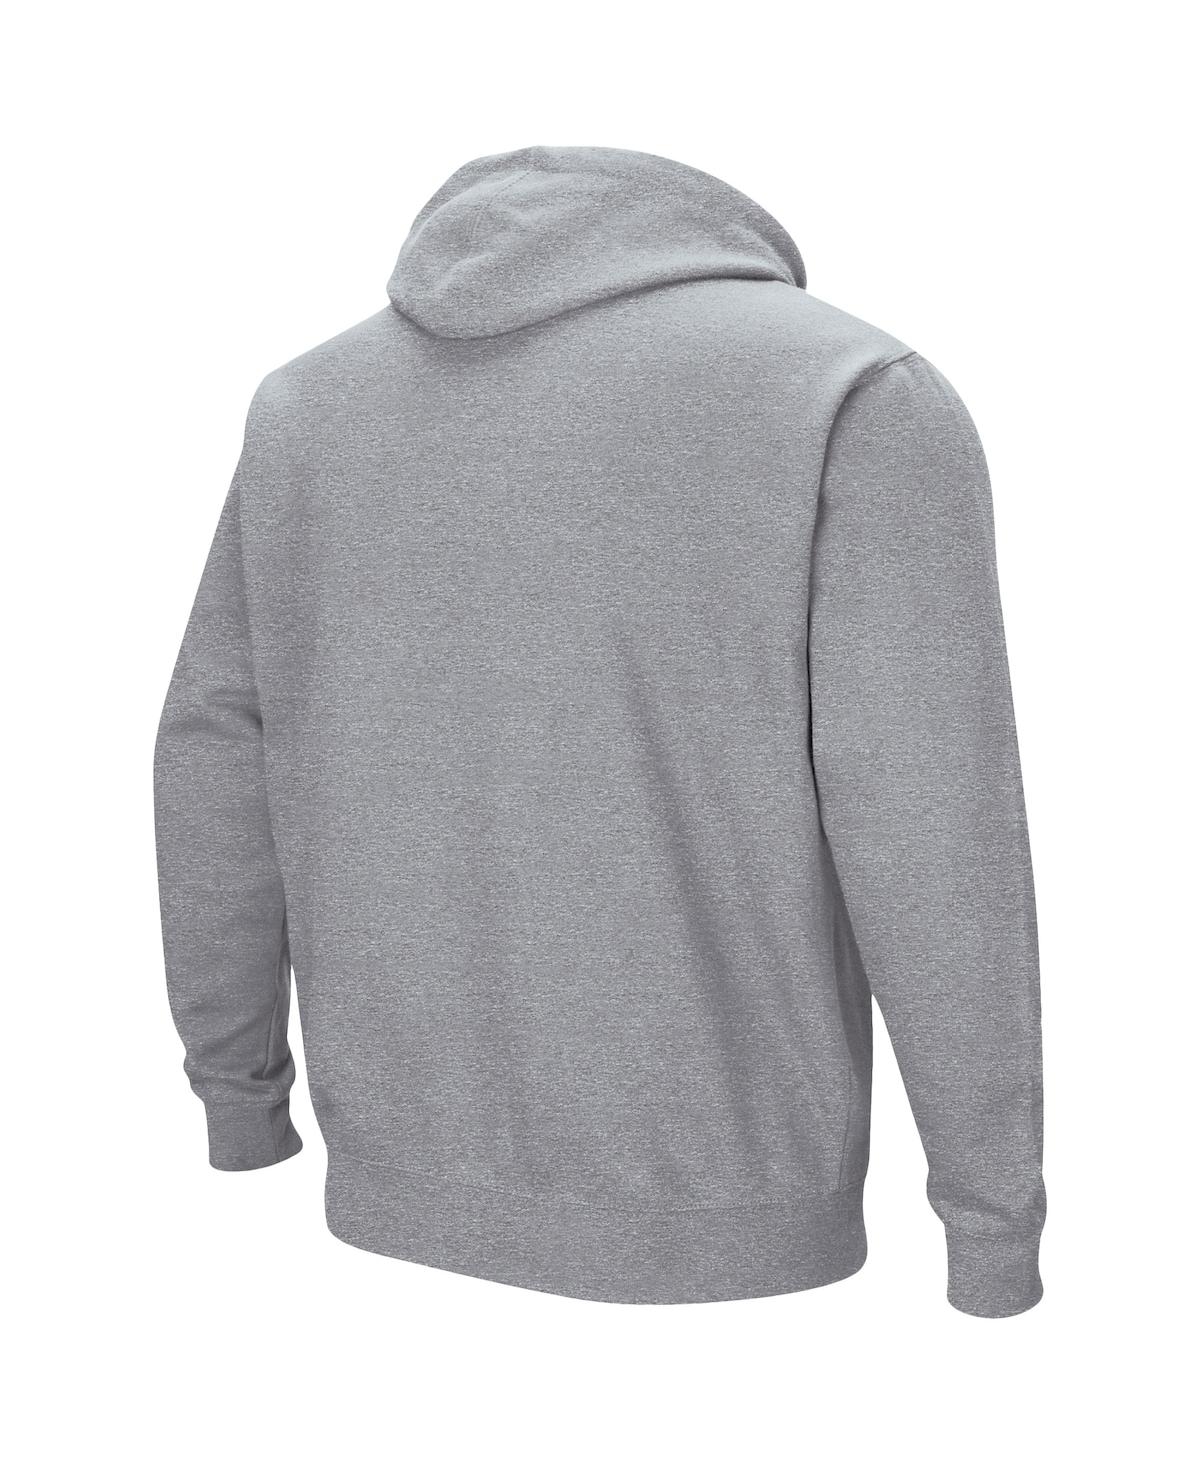 Shop Colosseum Men's  Heathered Gray Idaho Vandals Arch And Logo Pullover Hoodie